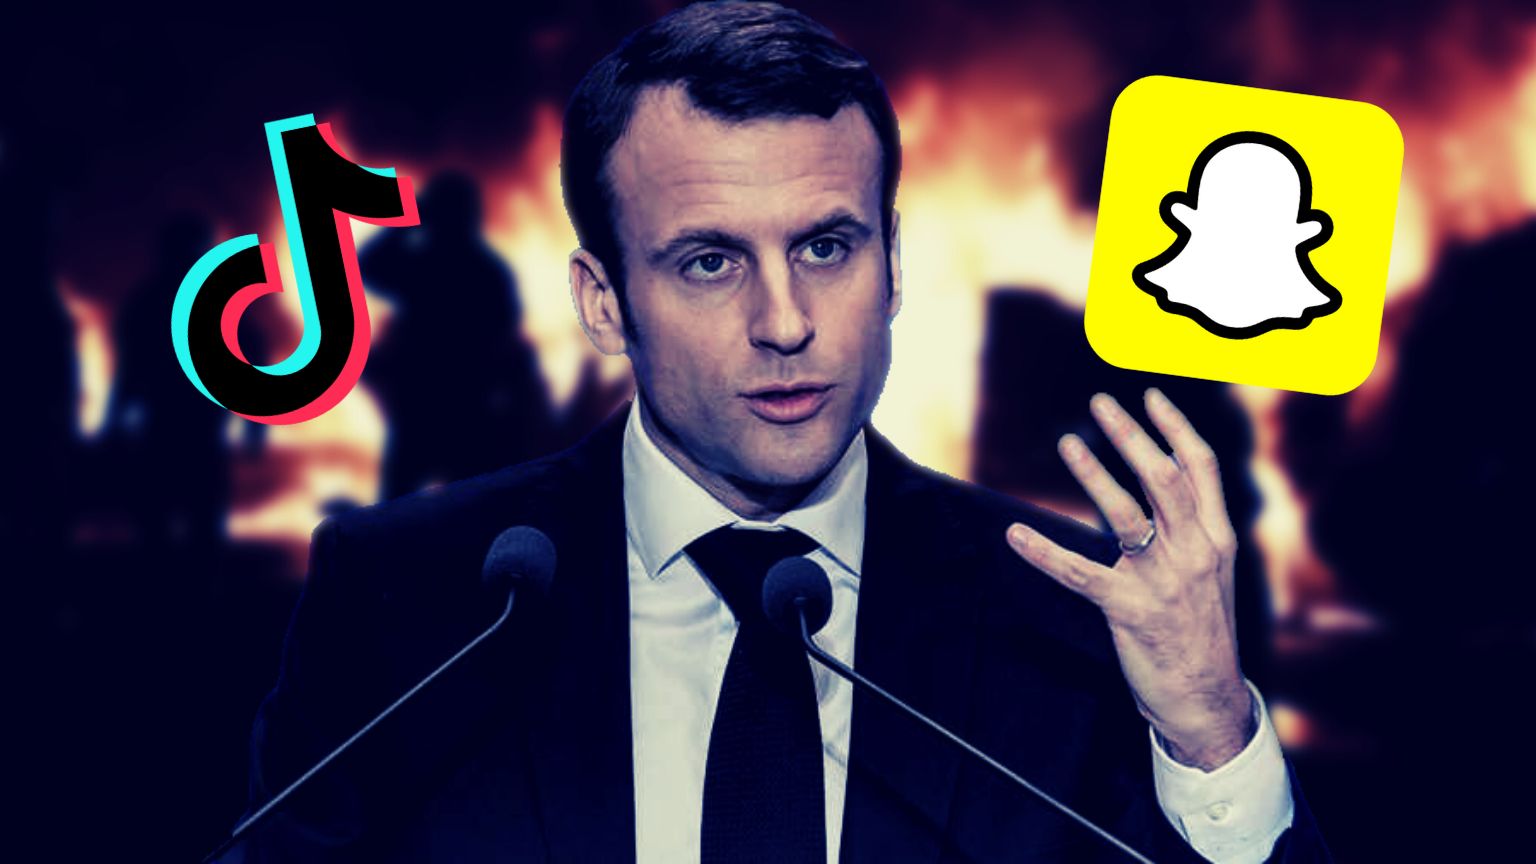 Macron Wants Platforms To Delete Riot Content, Blames Social Media and Video Games For Riot Spread